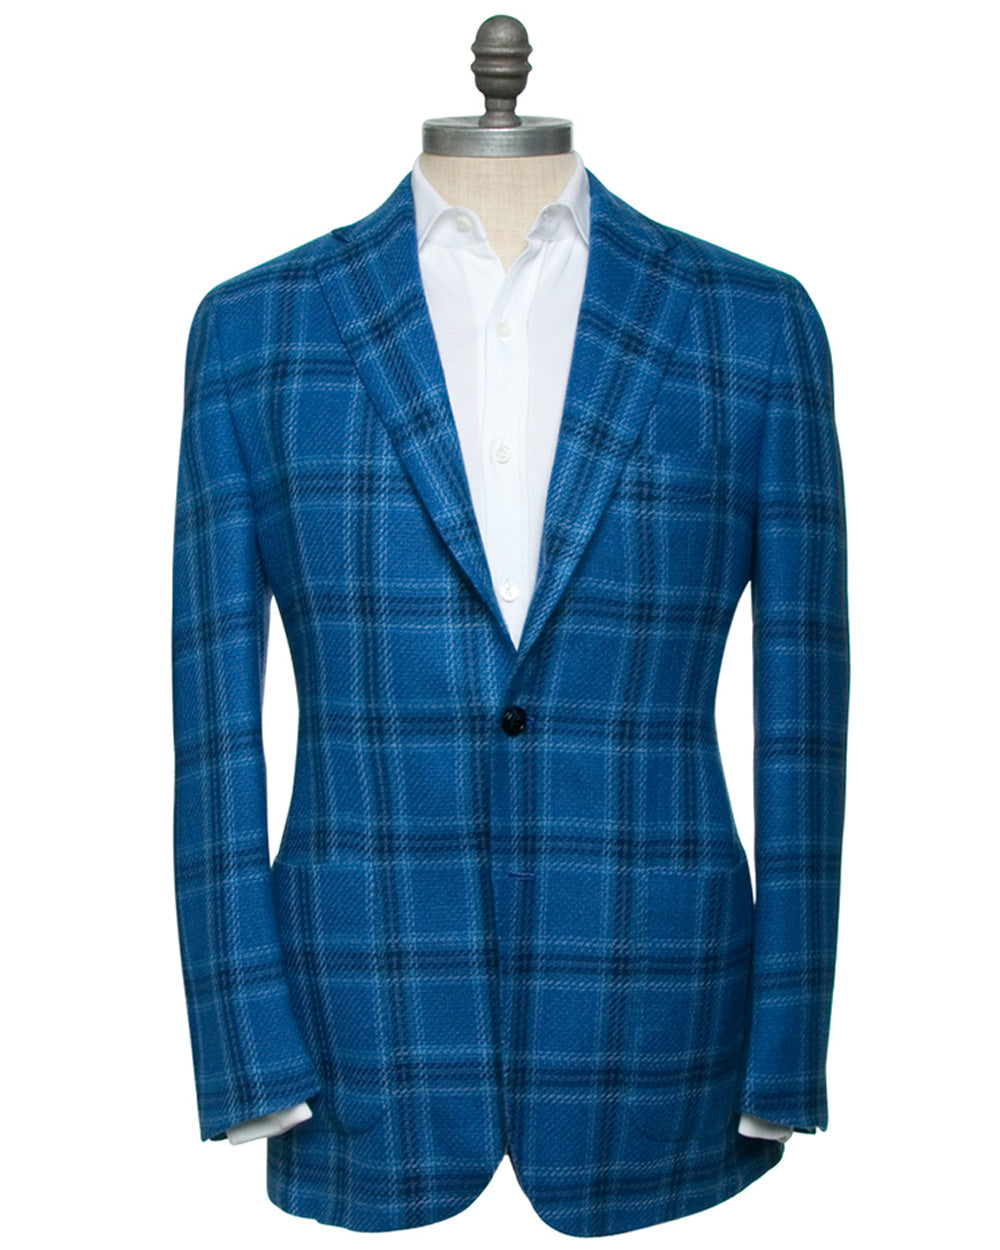 High Blue and Navy Plaid Sportcoat